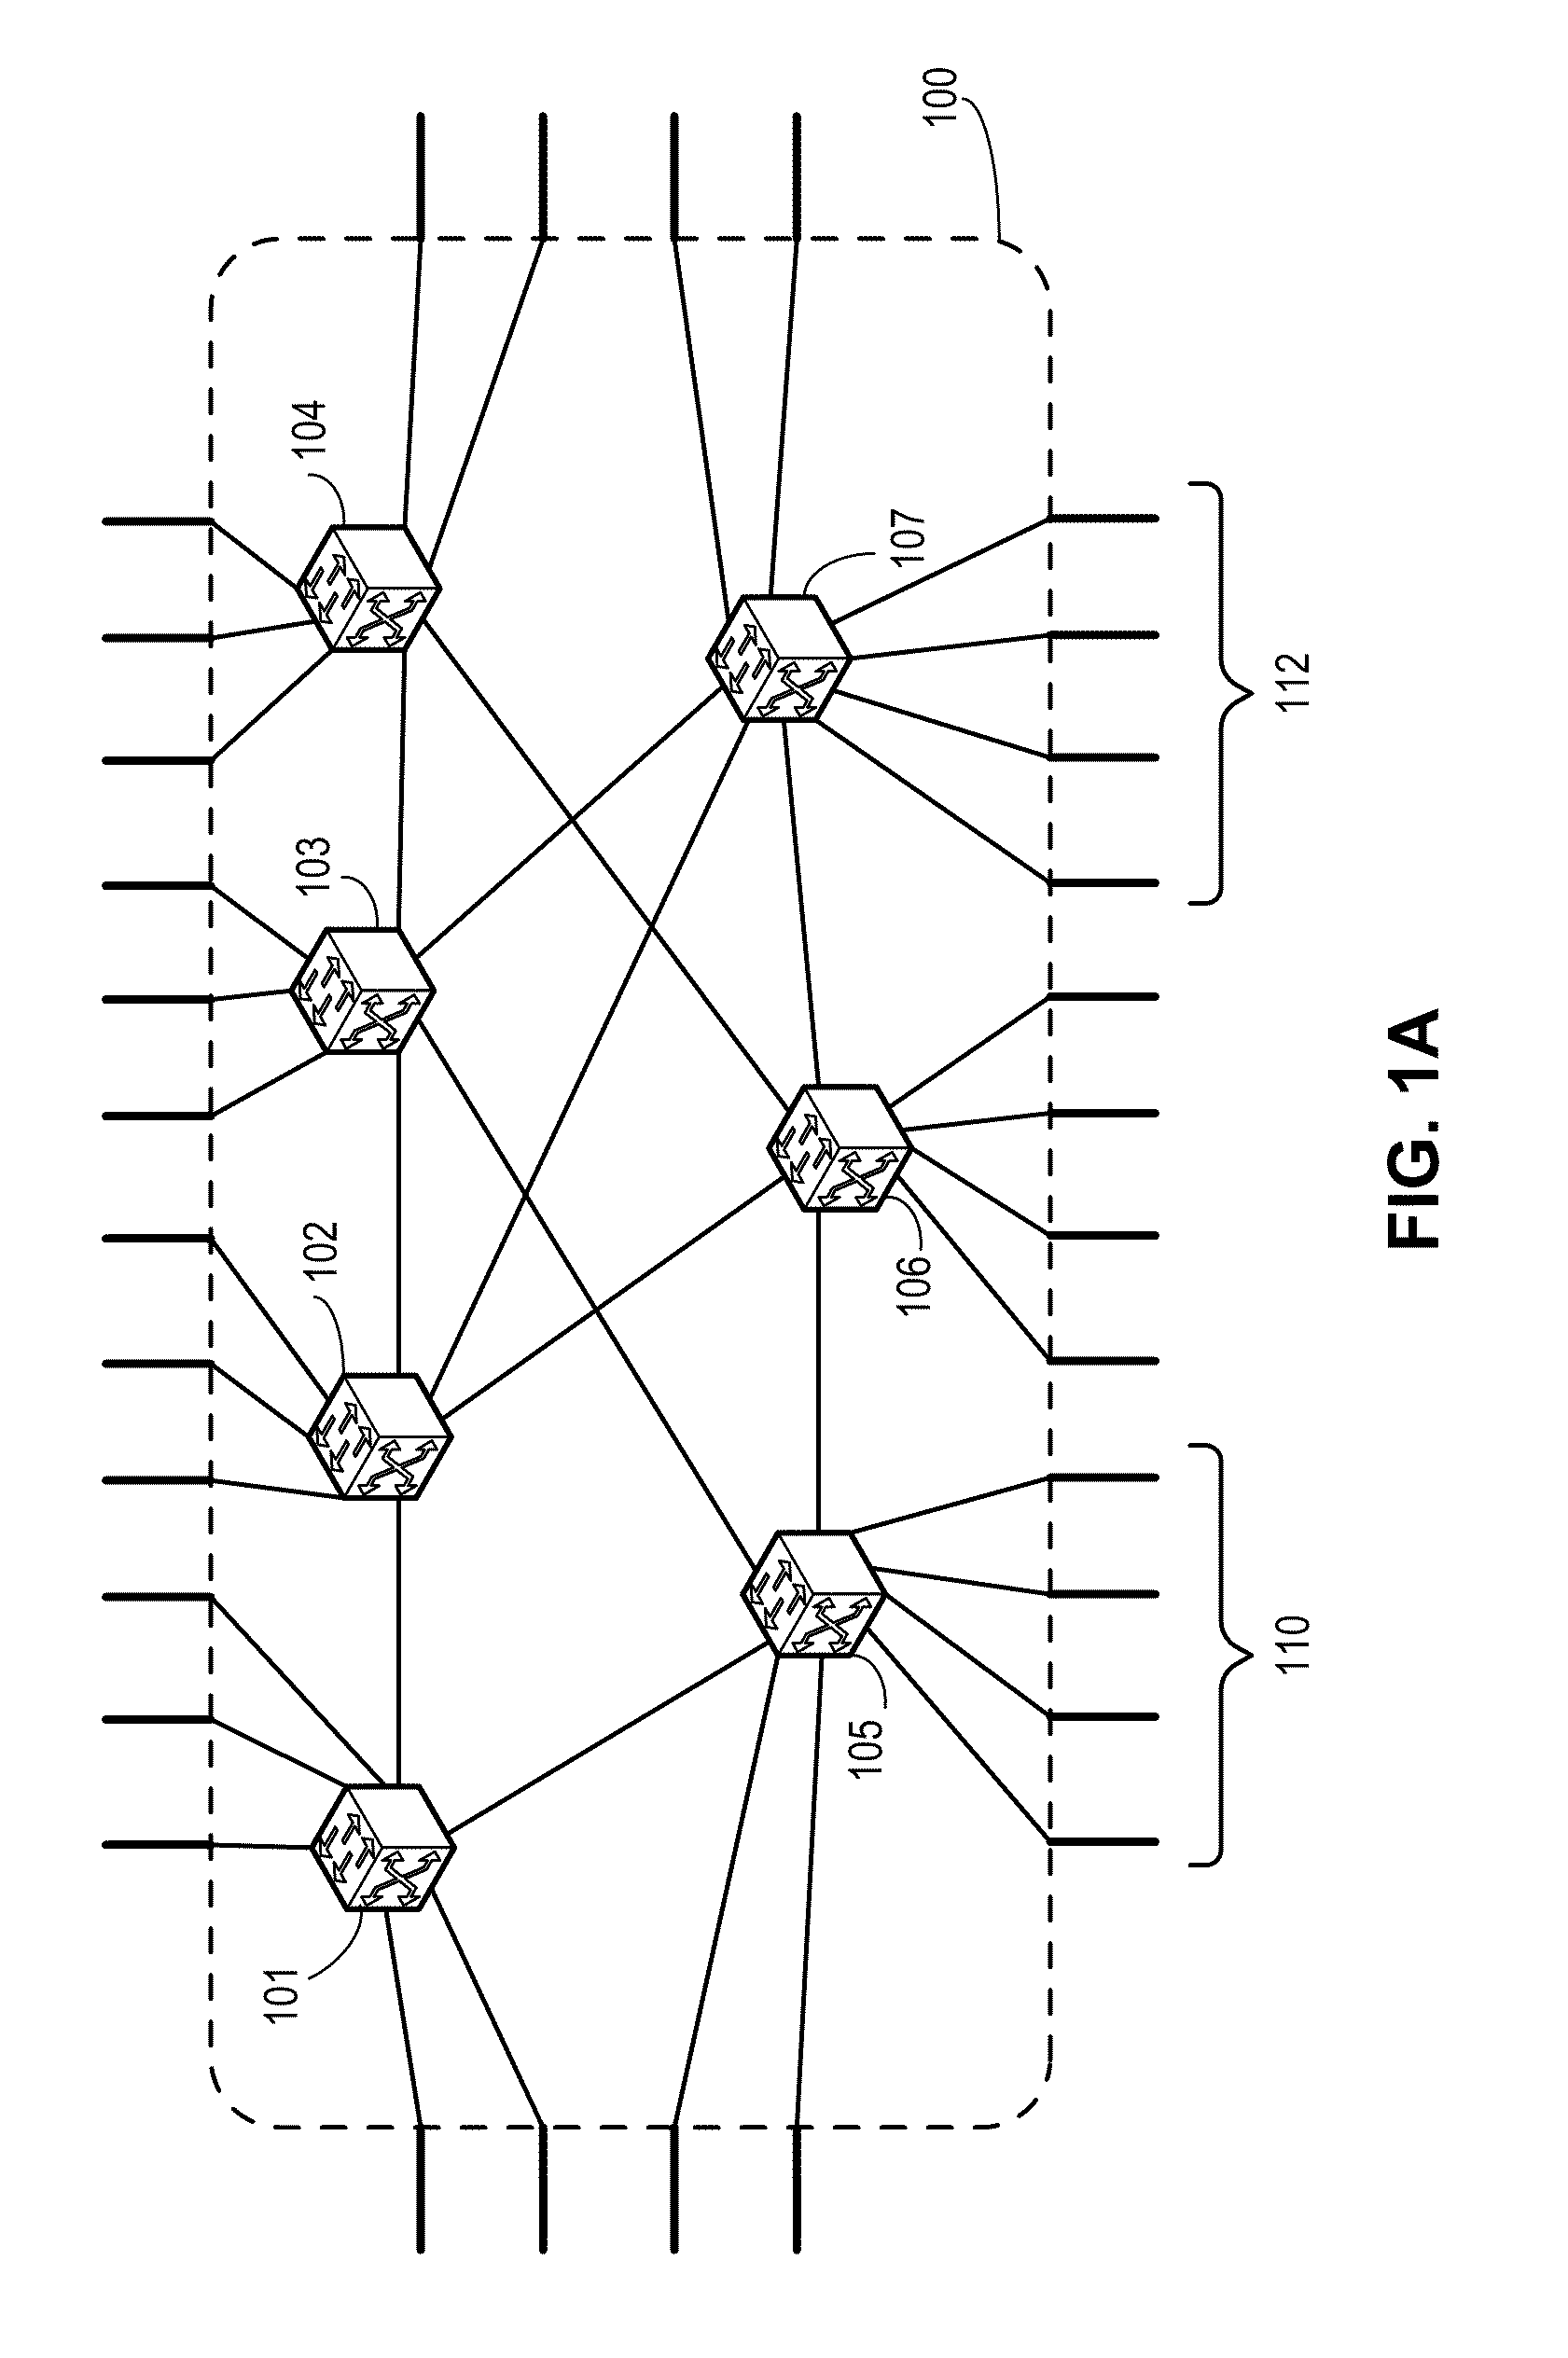 Virtual port grouping for virtual cluster switching